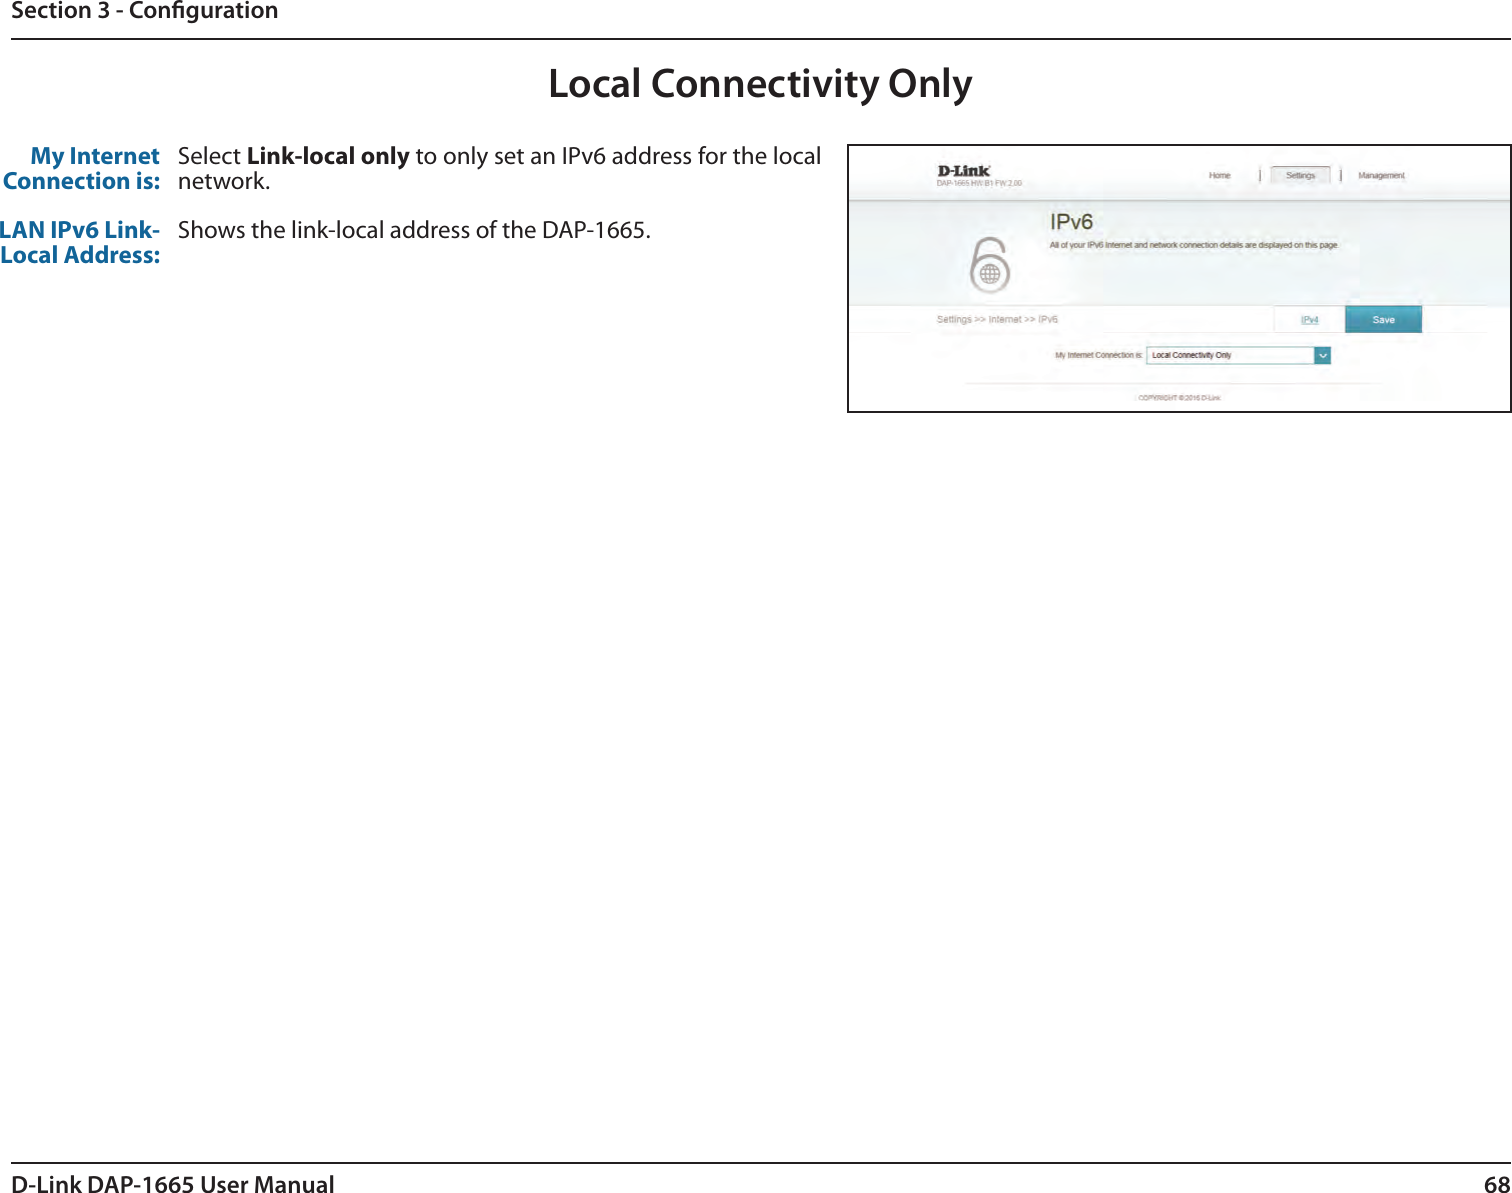 68D-Link DAP-1665 User ManualSection 3 - CongurationMy Internet Connection is:LAN IPv6 Link-Local Address:Select Link-local only to only set an IPv6 address for the local network. Shows the link-local address of the DAP-1665.Local Connectivity Only